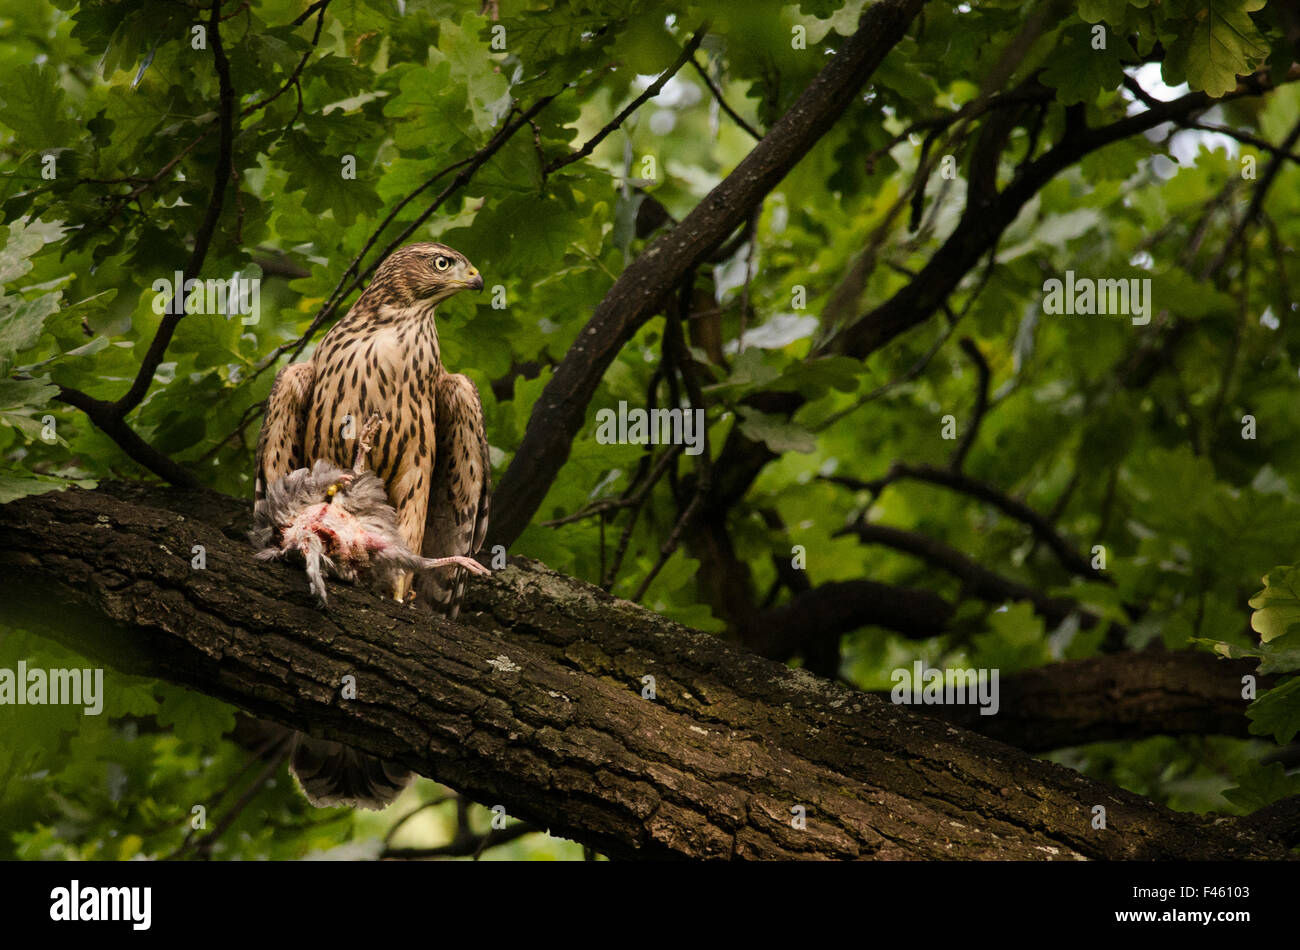 Northern goshawk (Accipiter gentilis), recently fledged juvenile with feral pigeon prey. Berlin, Germany, July. Nominated in the Melvita Nature Images Awards competition 2014. Stock Photo